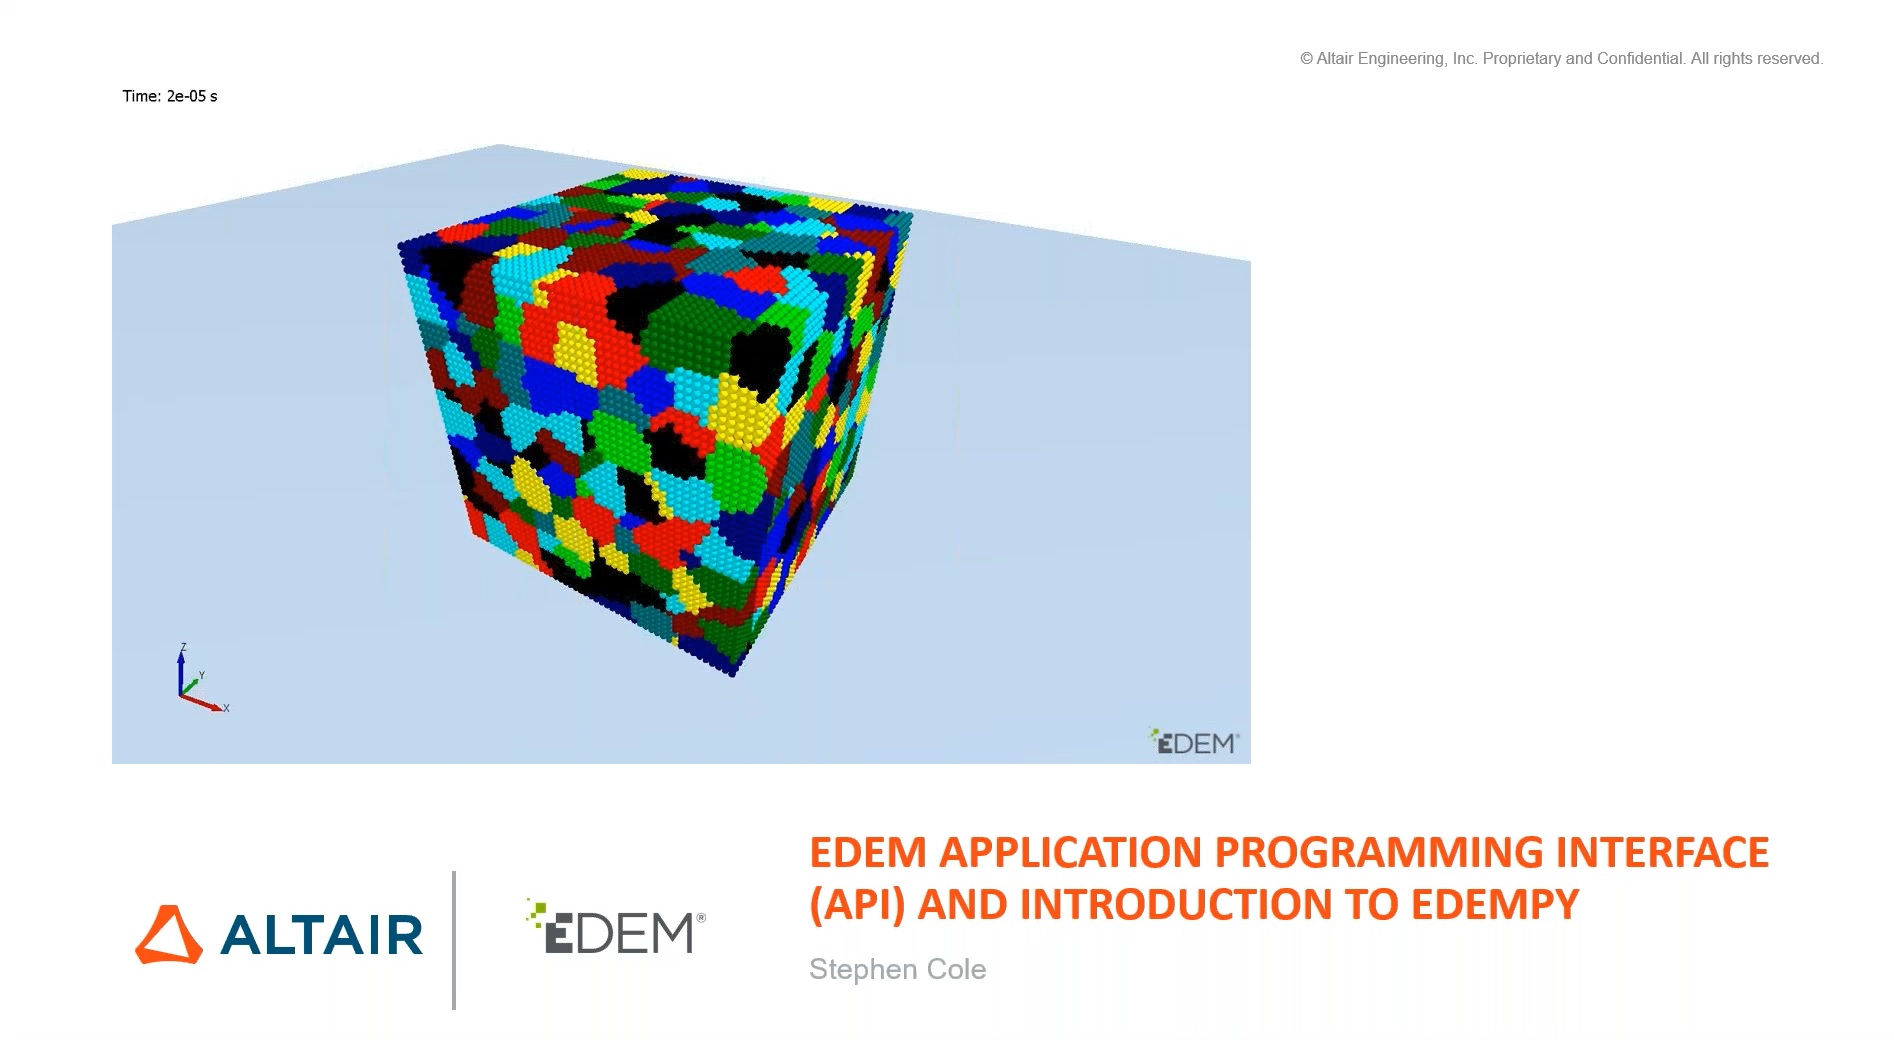 EDEM Application Programing Interface (API) and Introduction to EDEMpy